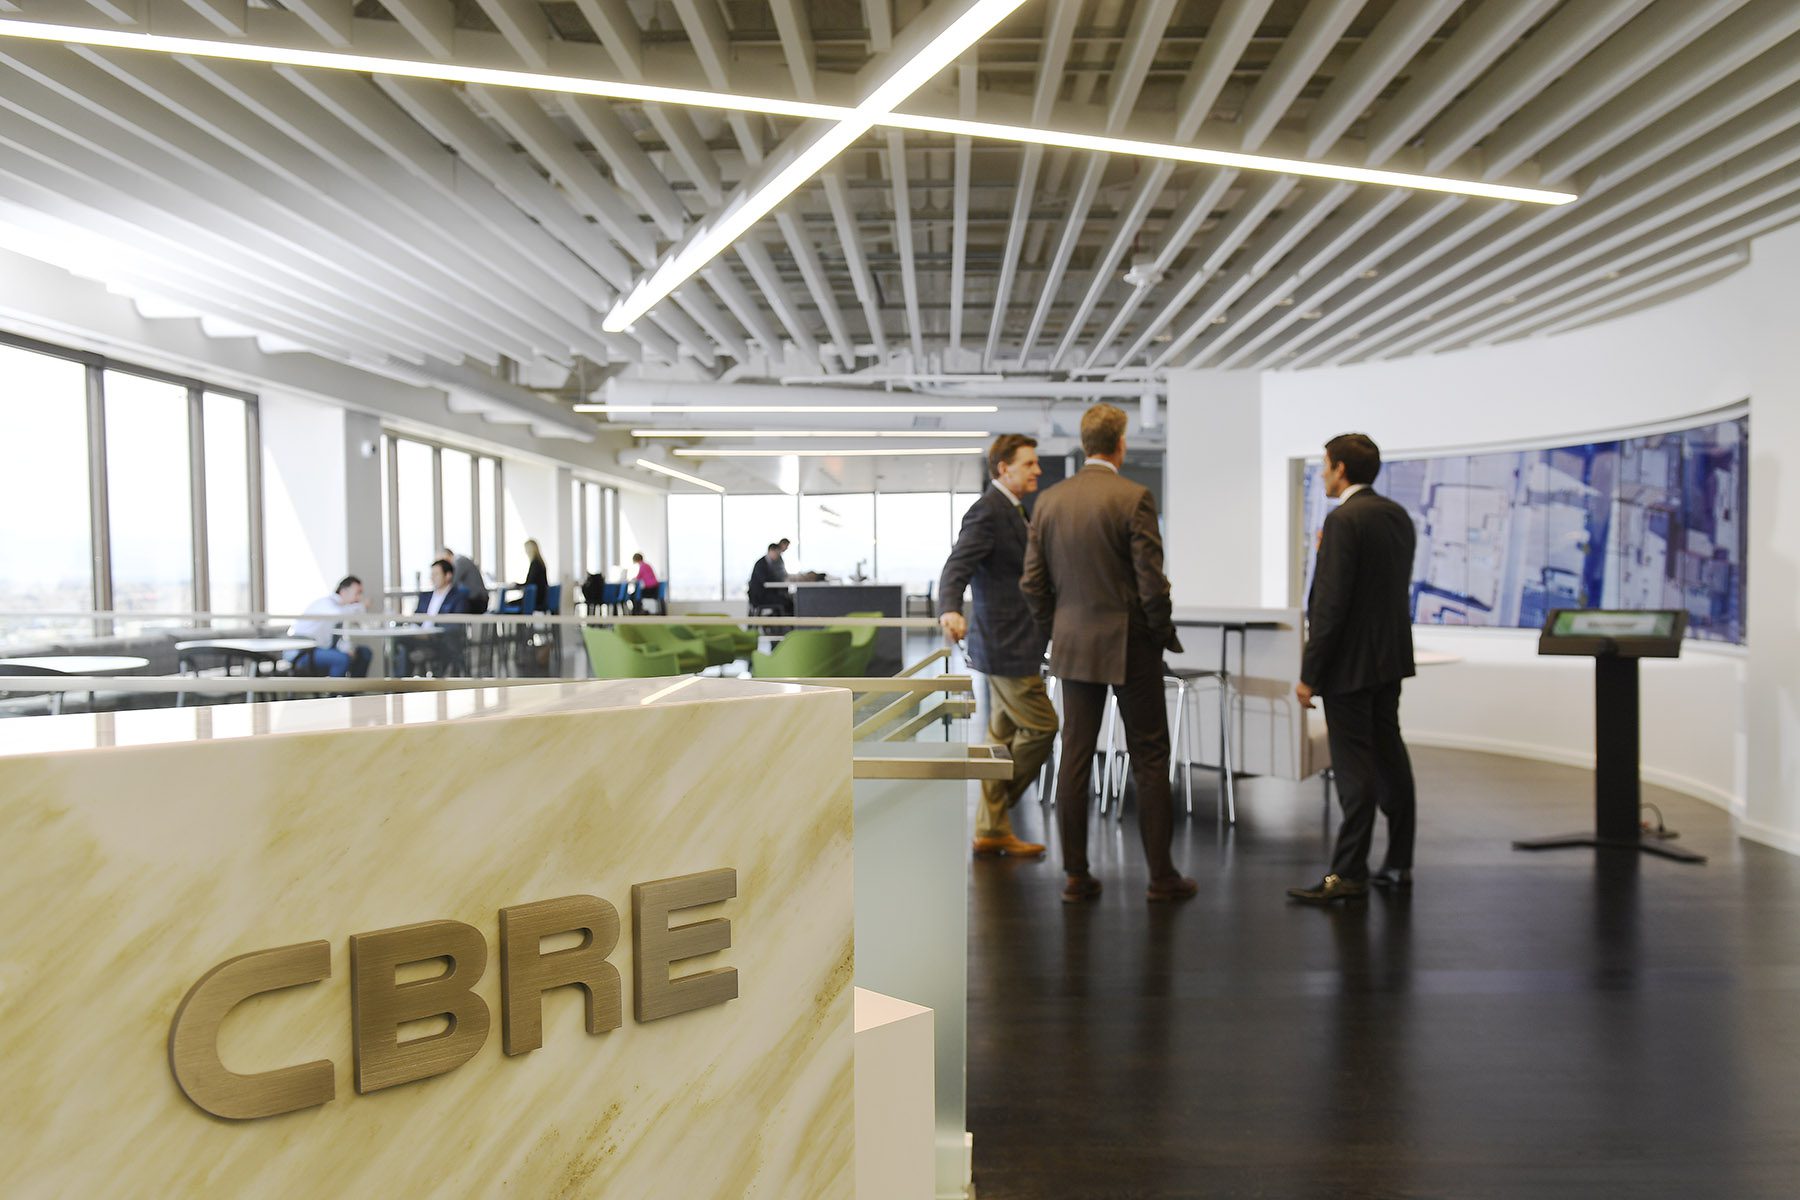 The commercial real estate firm CBRE just opened it's new Workplace360 office for it's downtown Denver office.